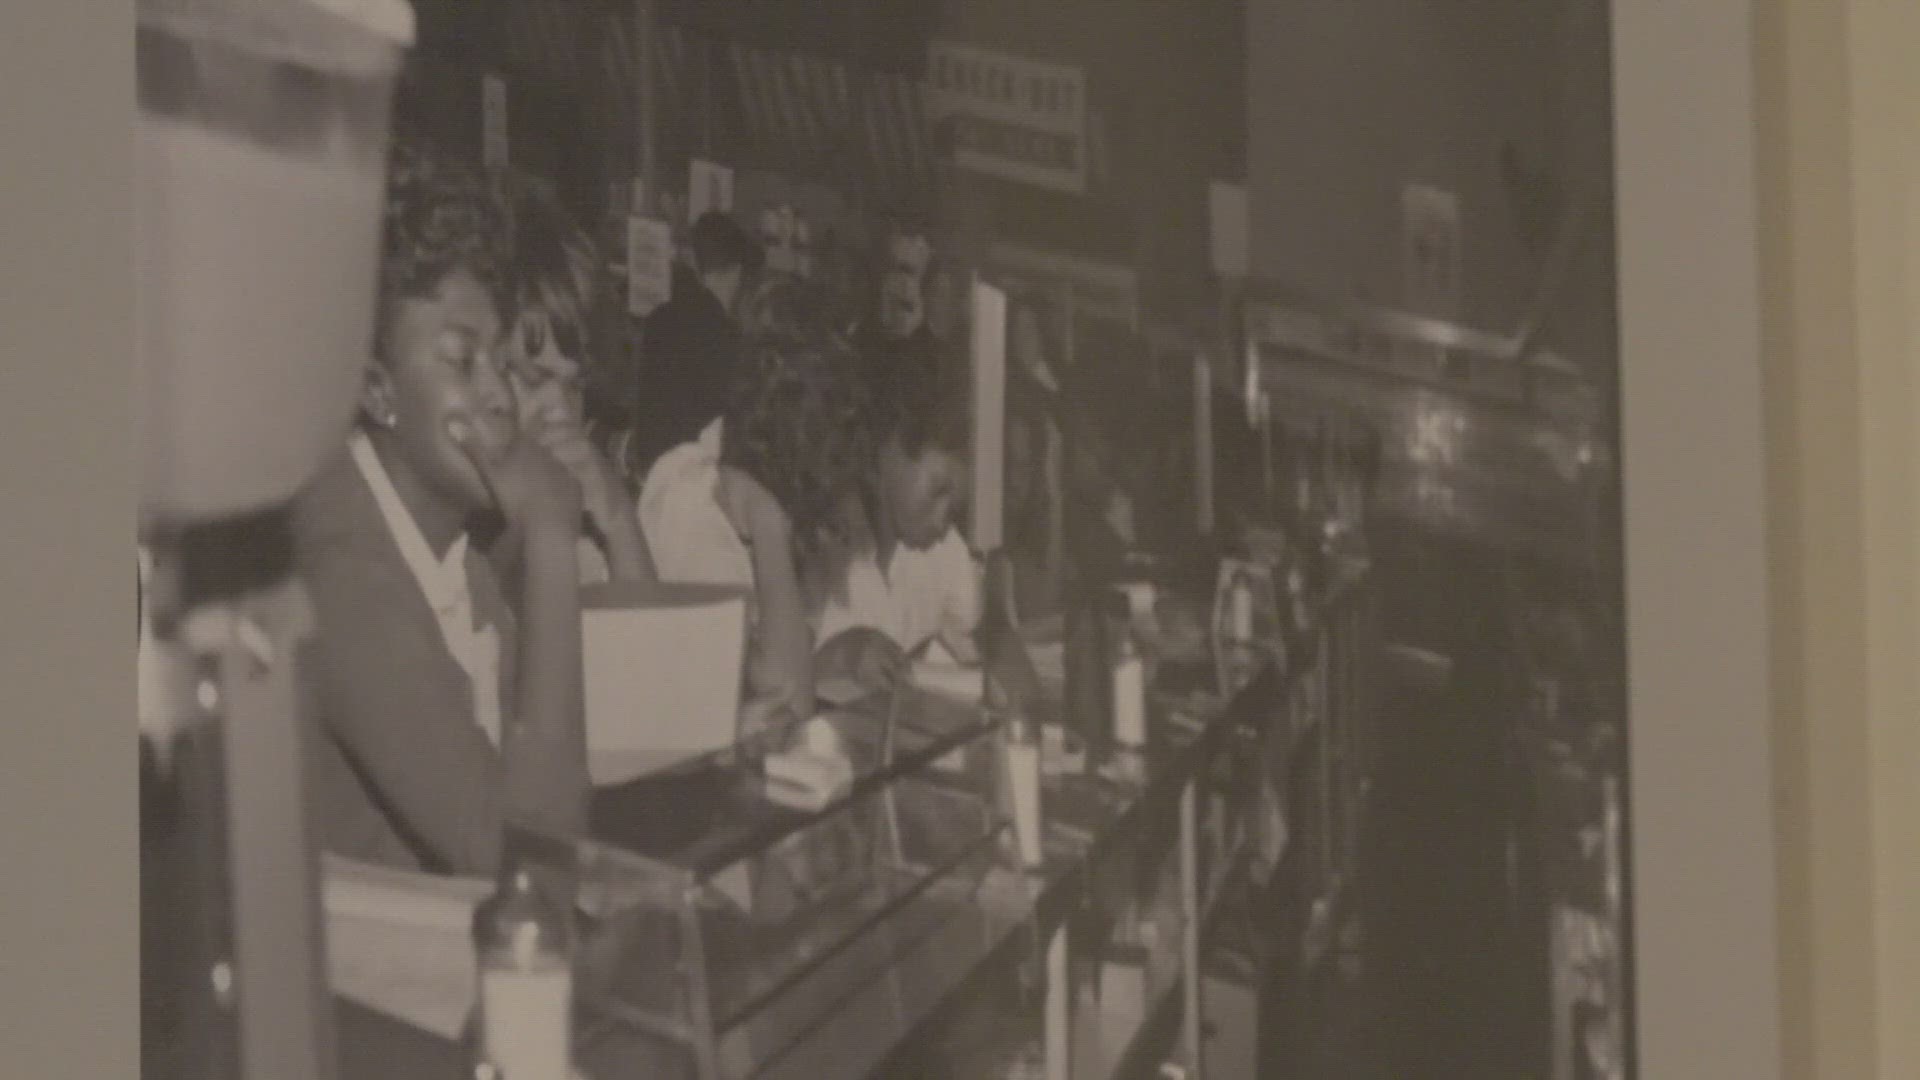 Four NC A&T students refused to leave Woolworth’s. This organizer helped make the protest a nationwide movement.